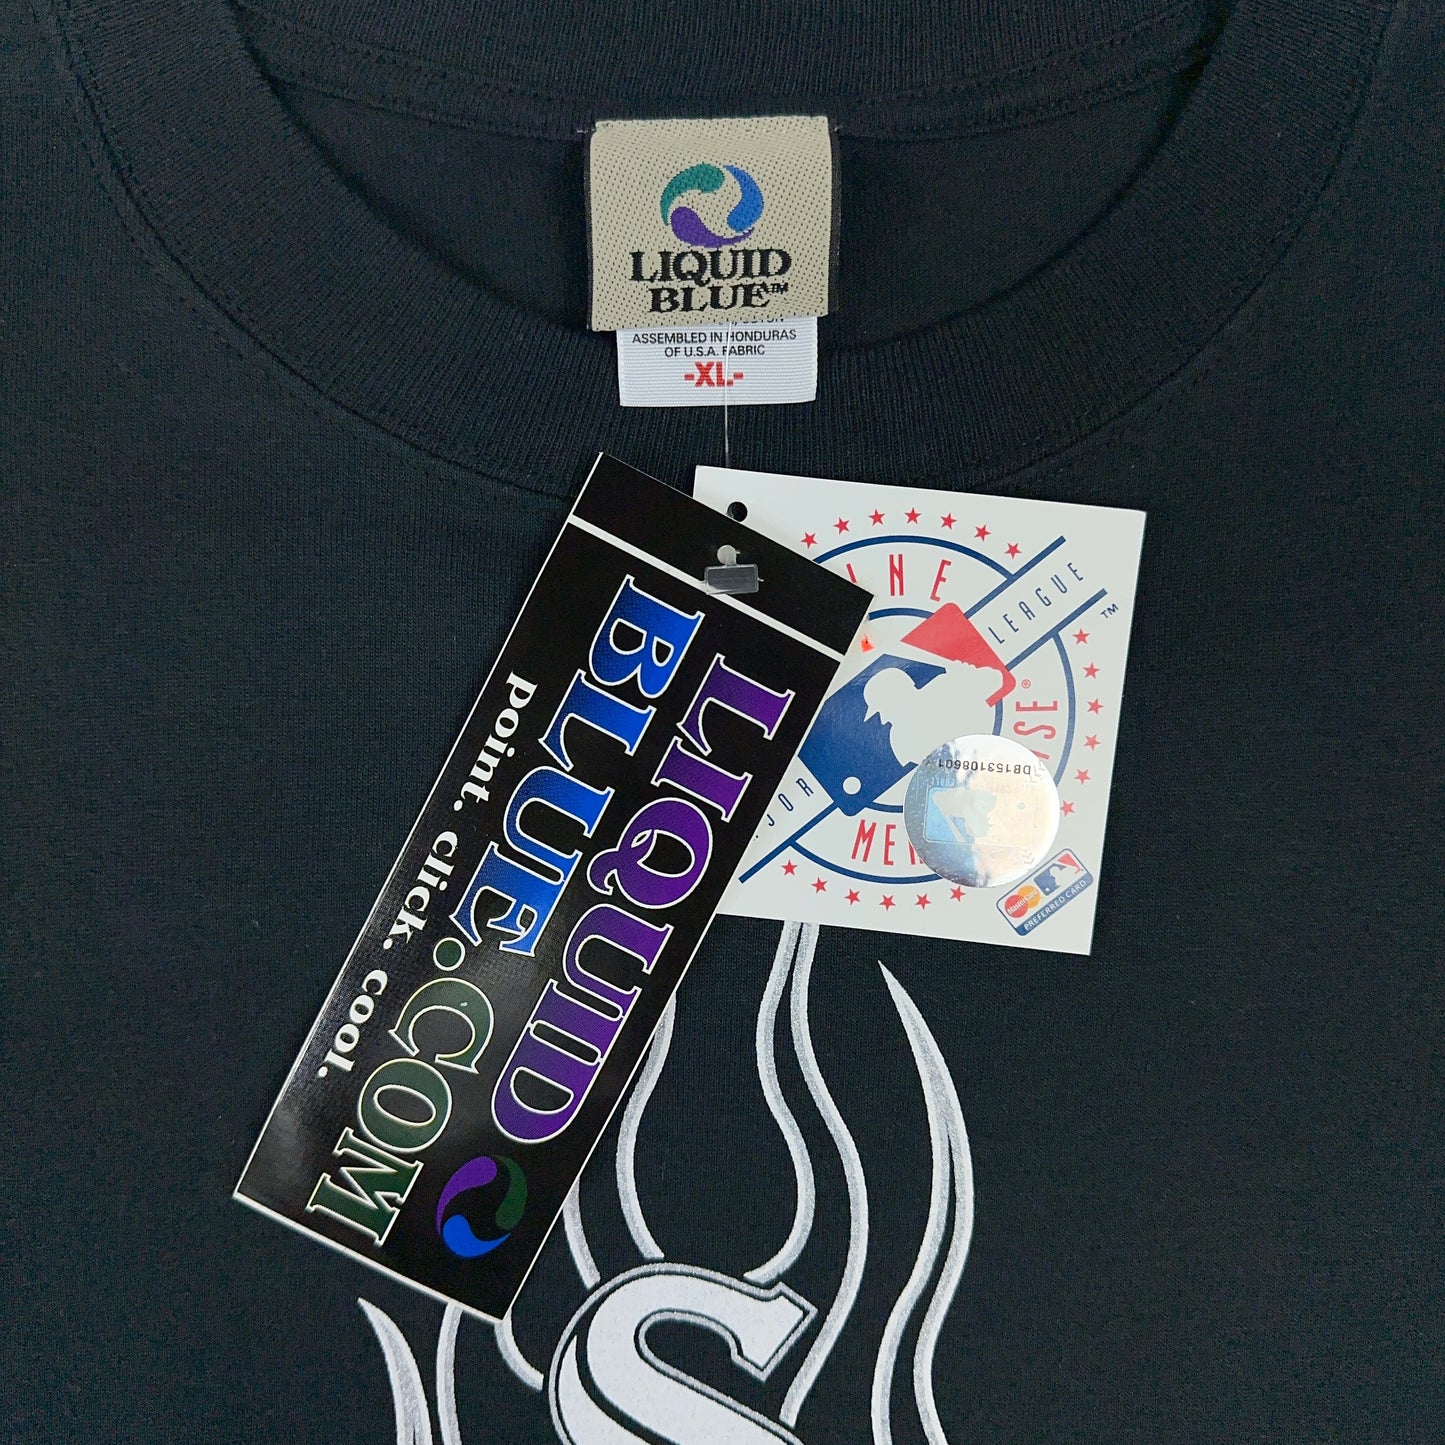 Vintage Chicago White Sox Liquid Blue Flame Long Sleeve Tee (New with Tags)